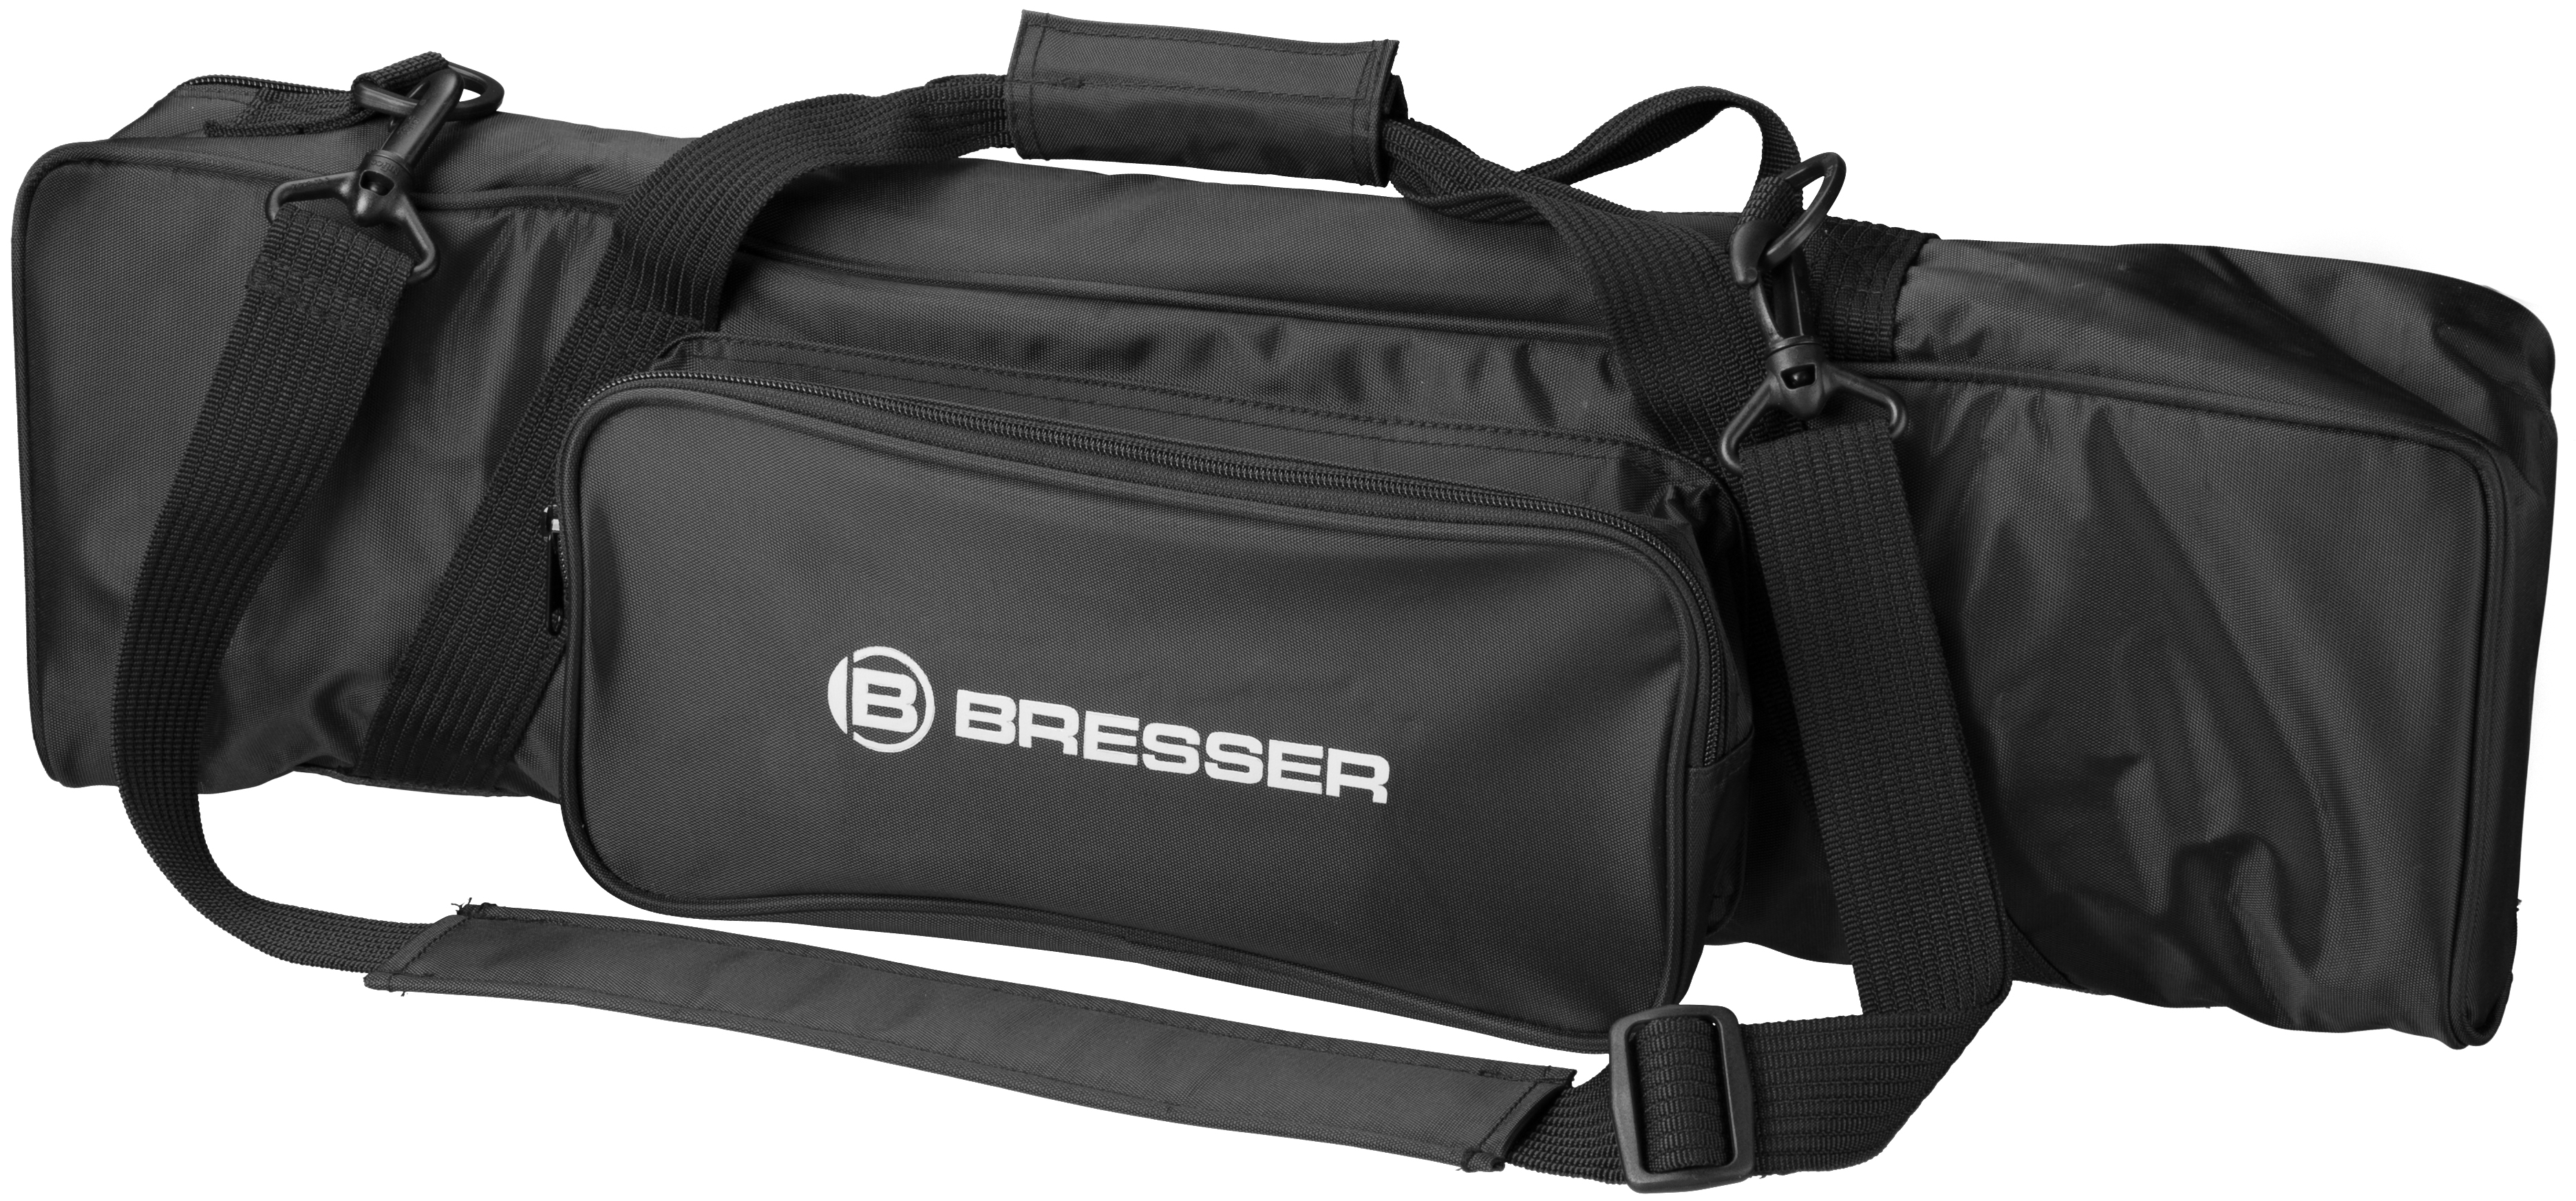 BRESSER Tripod TP-100 DX with carry bag